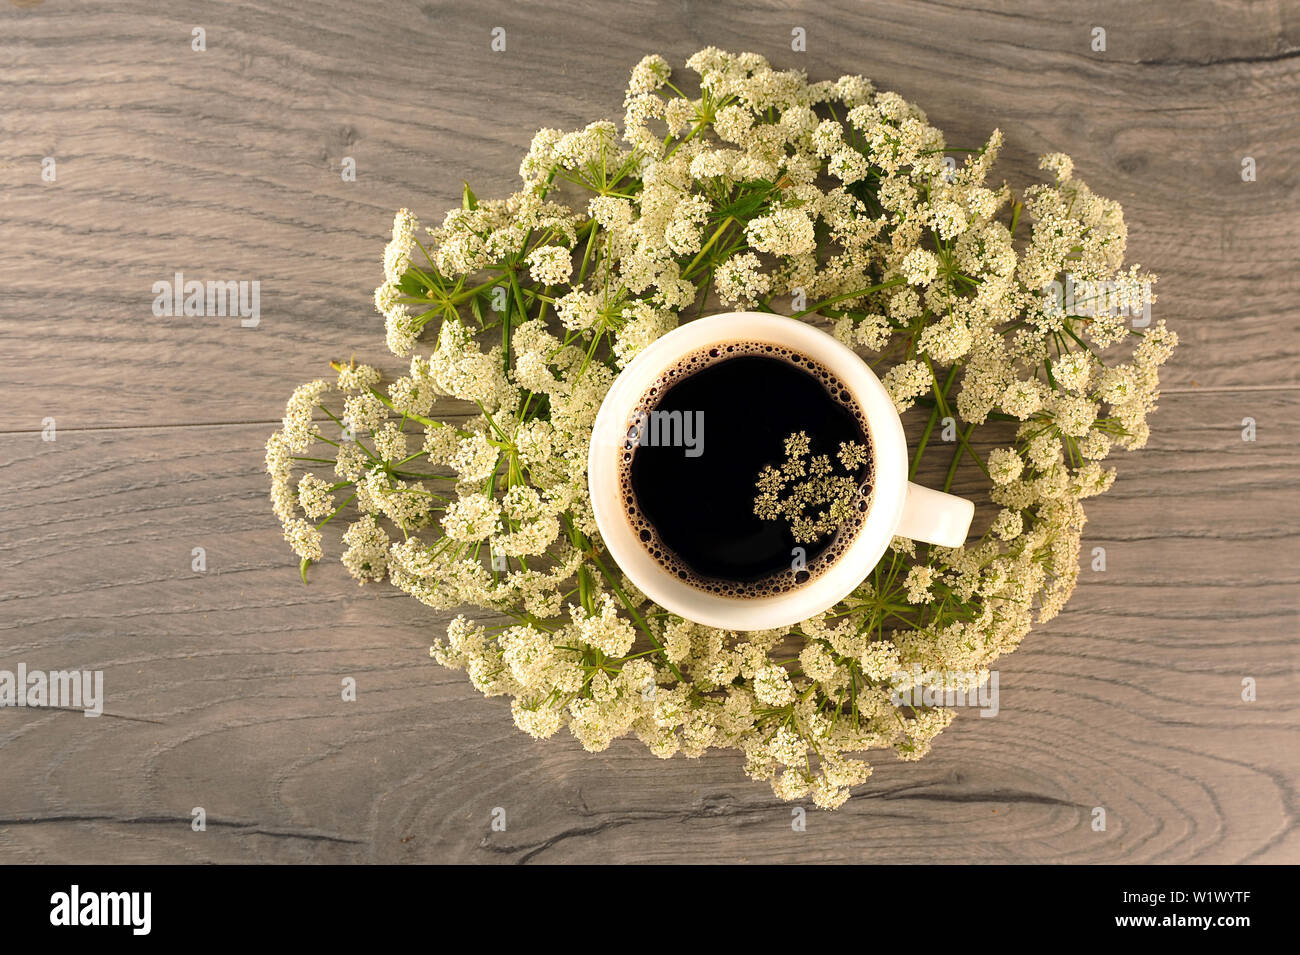 Flat lay shot of coffee in white cup surrounded by white flowers. Cowparsley and hot beverage on wooden table. Horizontal photo. Stock Photo